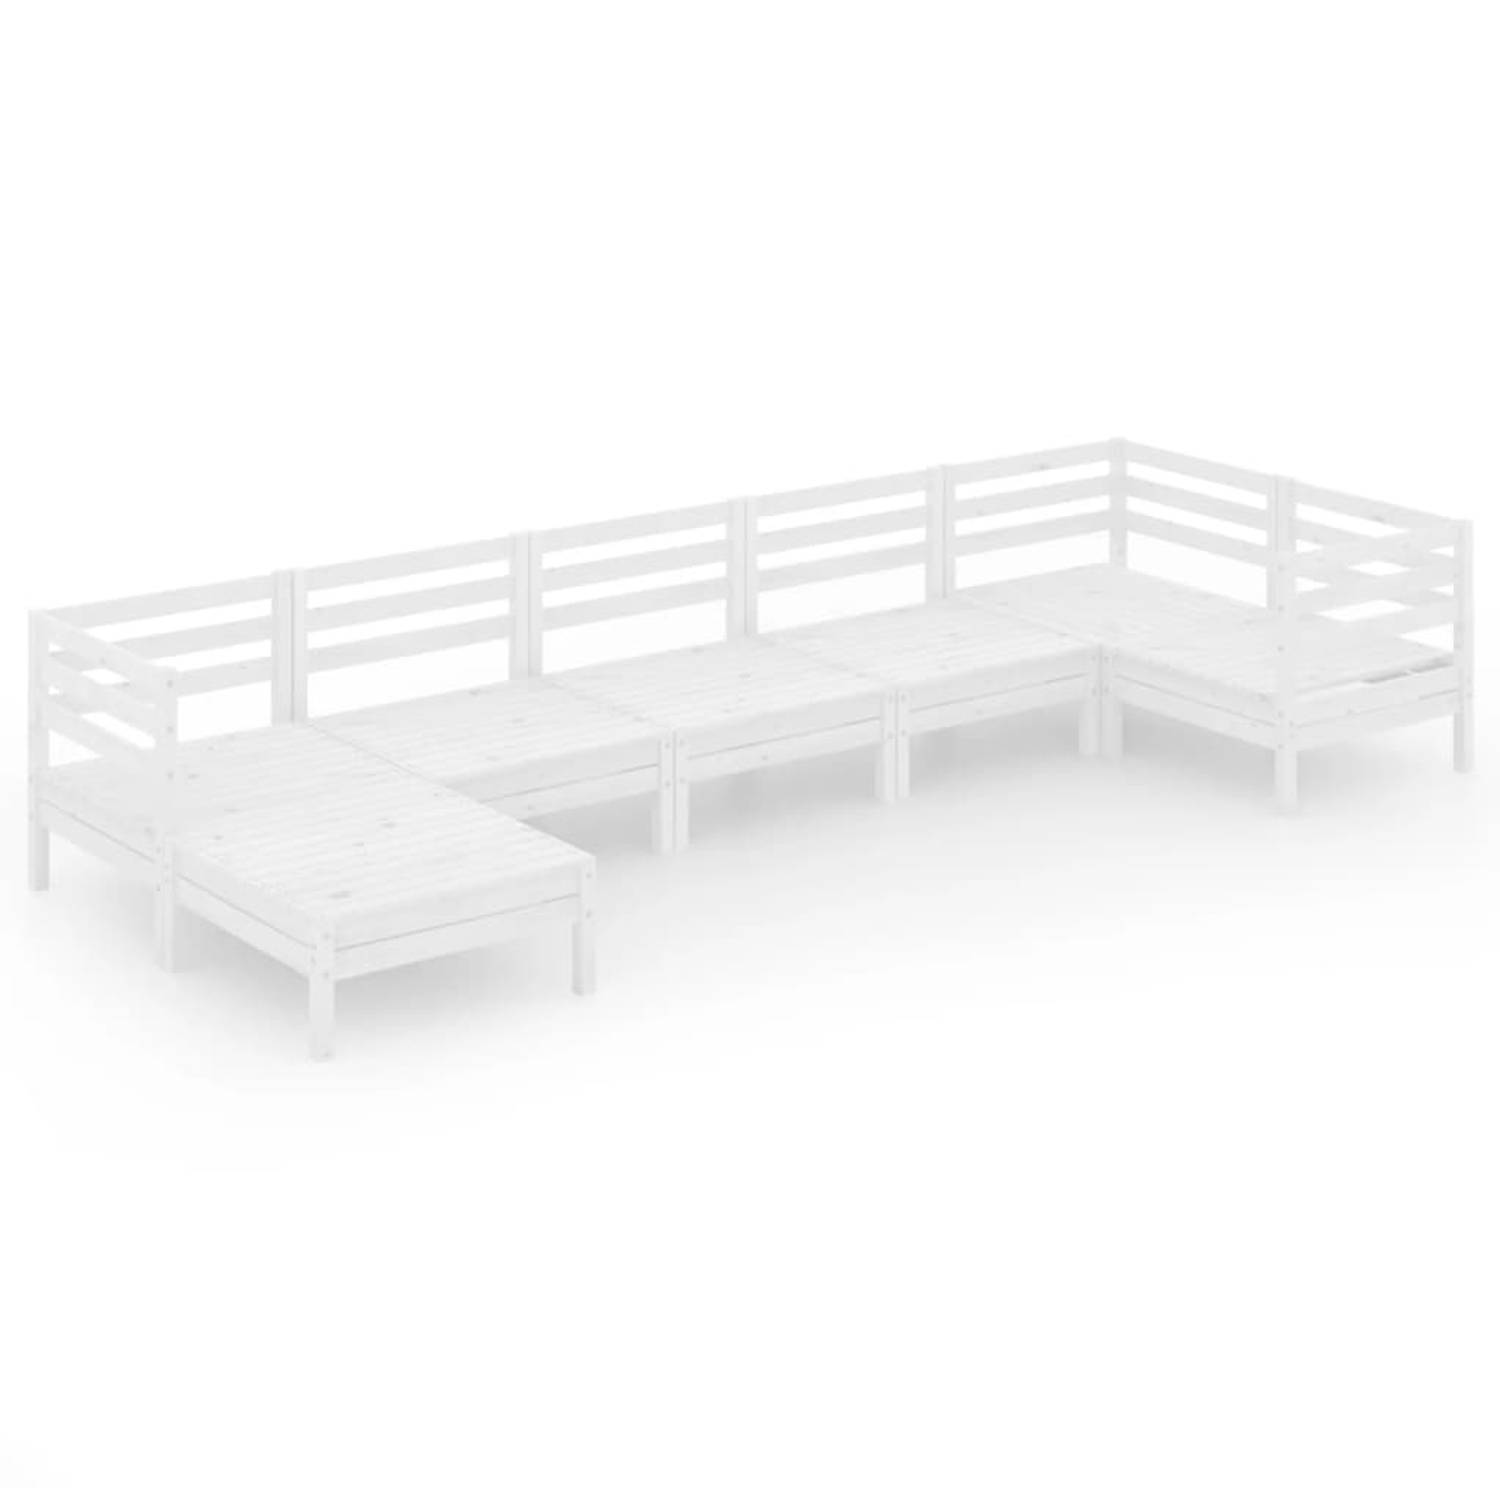 The Living Store Tuinset - Grenenhout - Wit - 63.5 x 63.5 x 62.5 cm - Modulair design